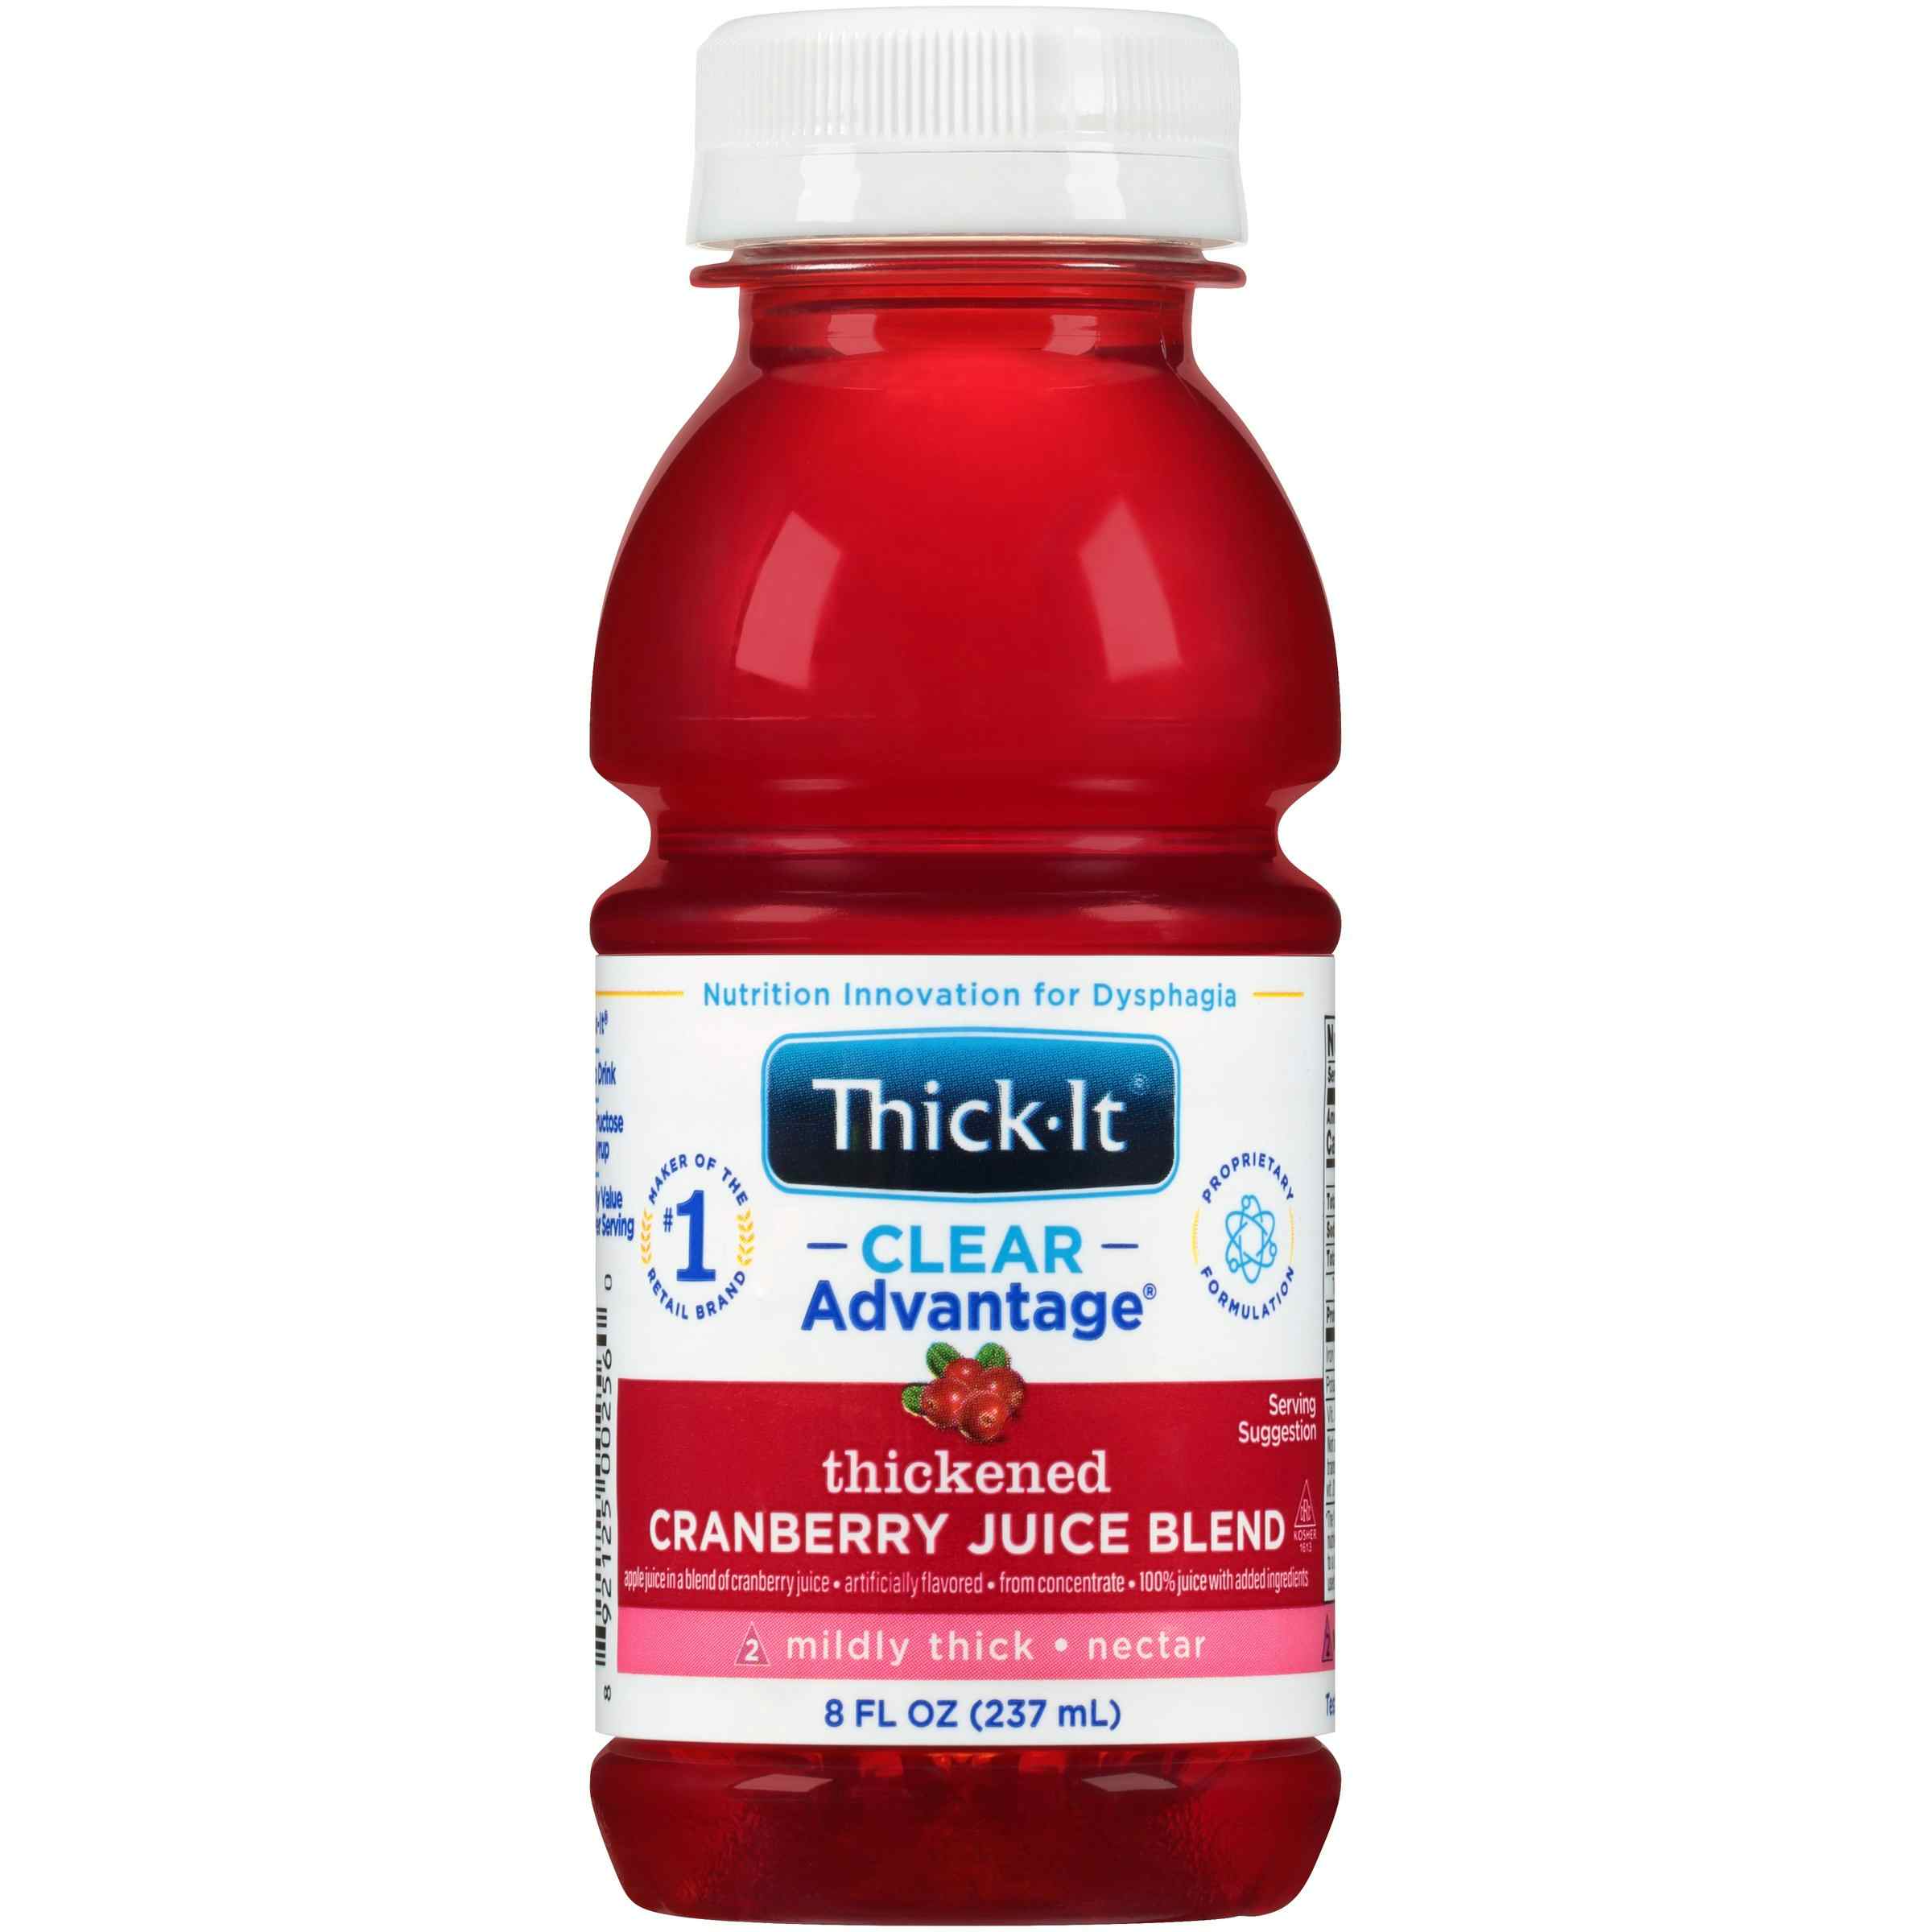 Thick-It Clear Advantage Thickened Cranberry Juice Blend, Mildly Thick, Nectar Consistency, B459-L9044, 8 oz. - 1 Each, Case of 24